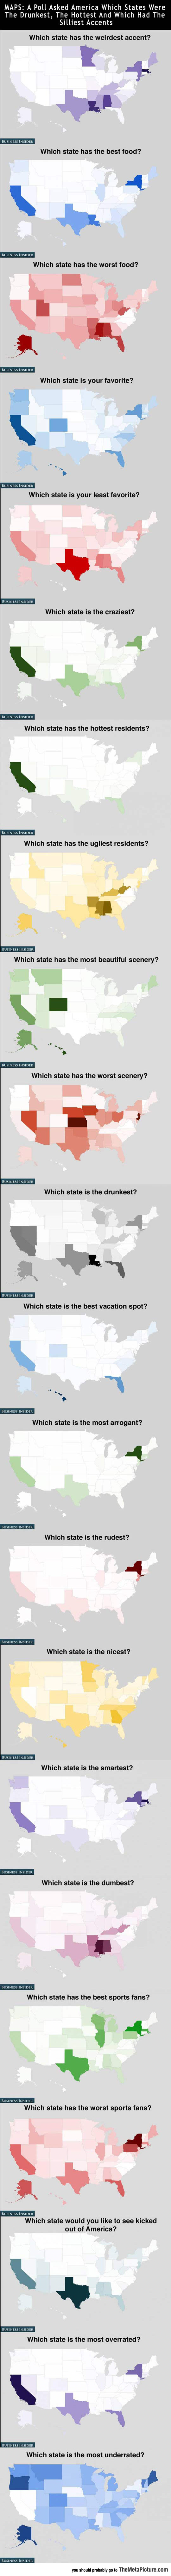 How Americans Feel About Every State